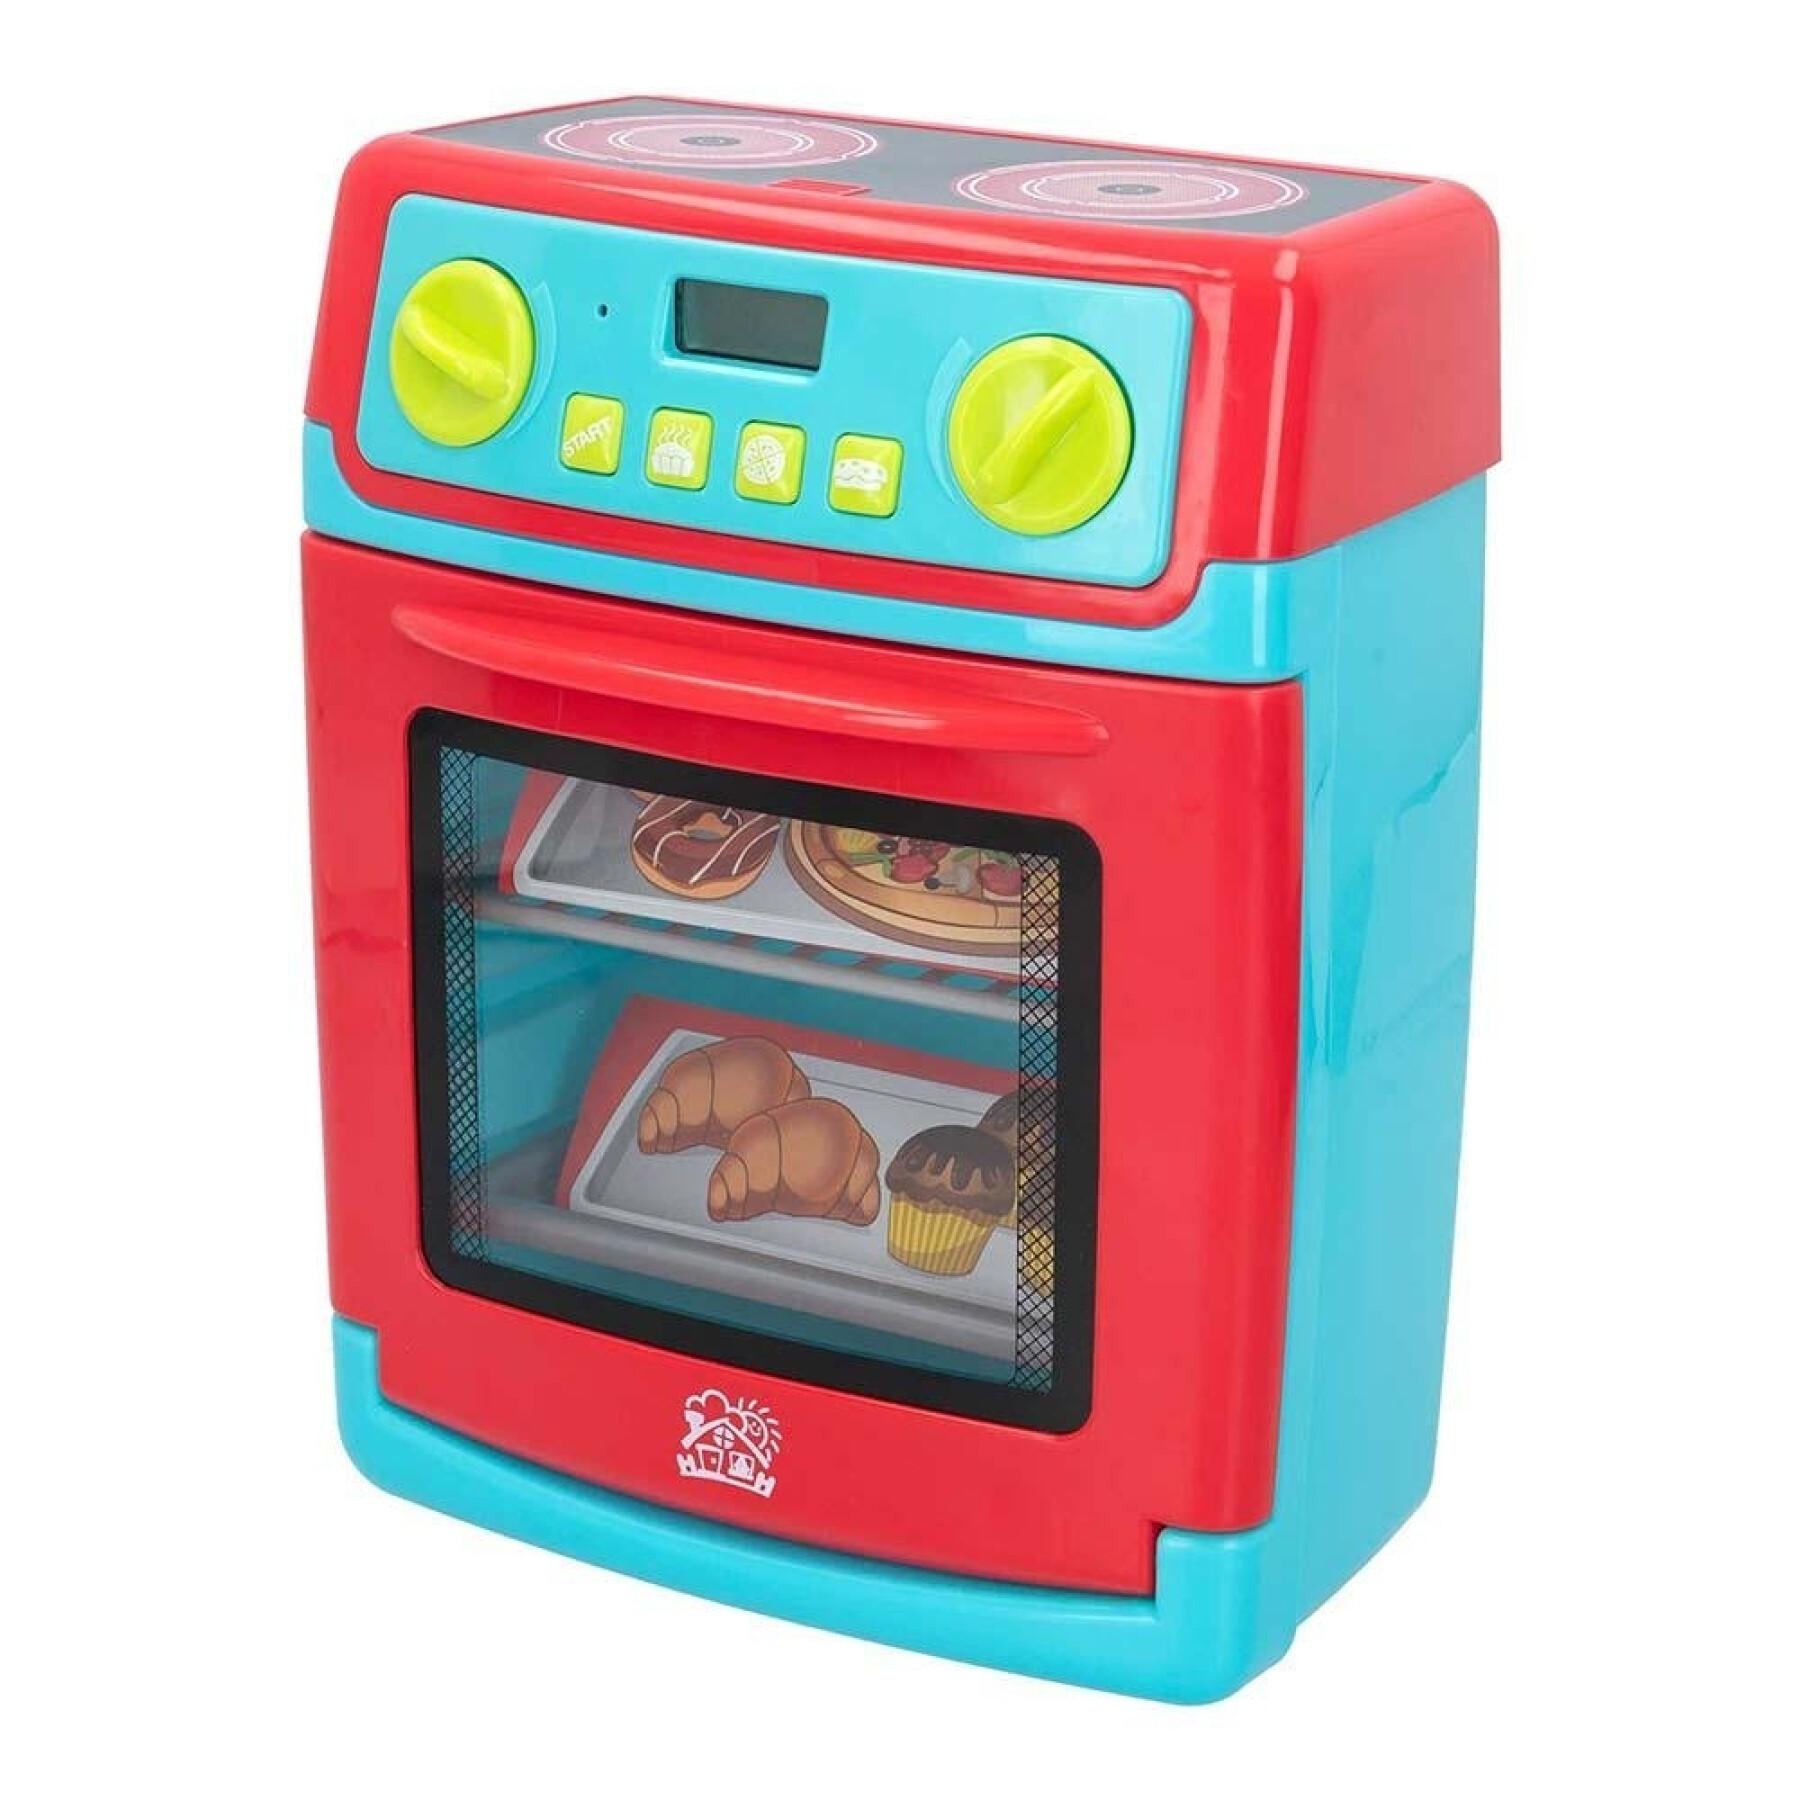 Sound and light oven PlayGo